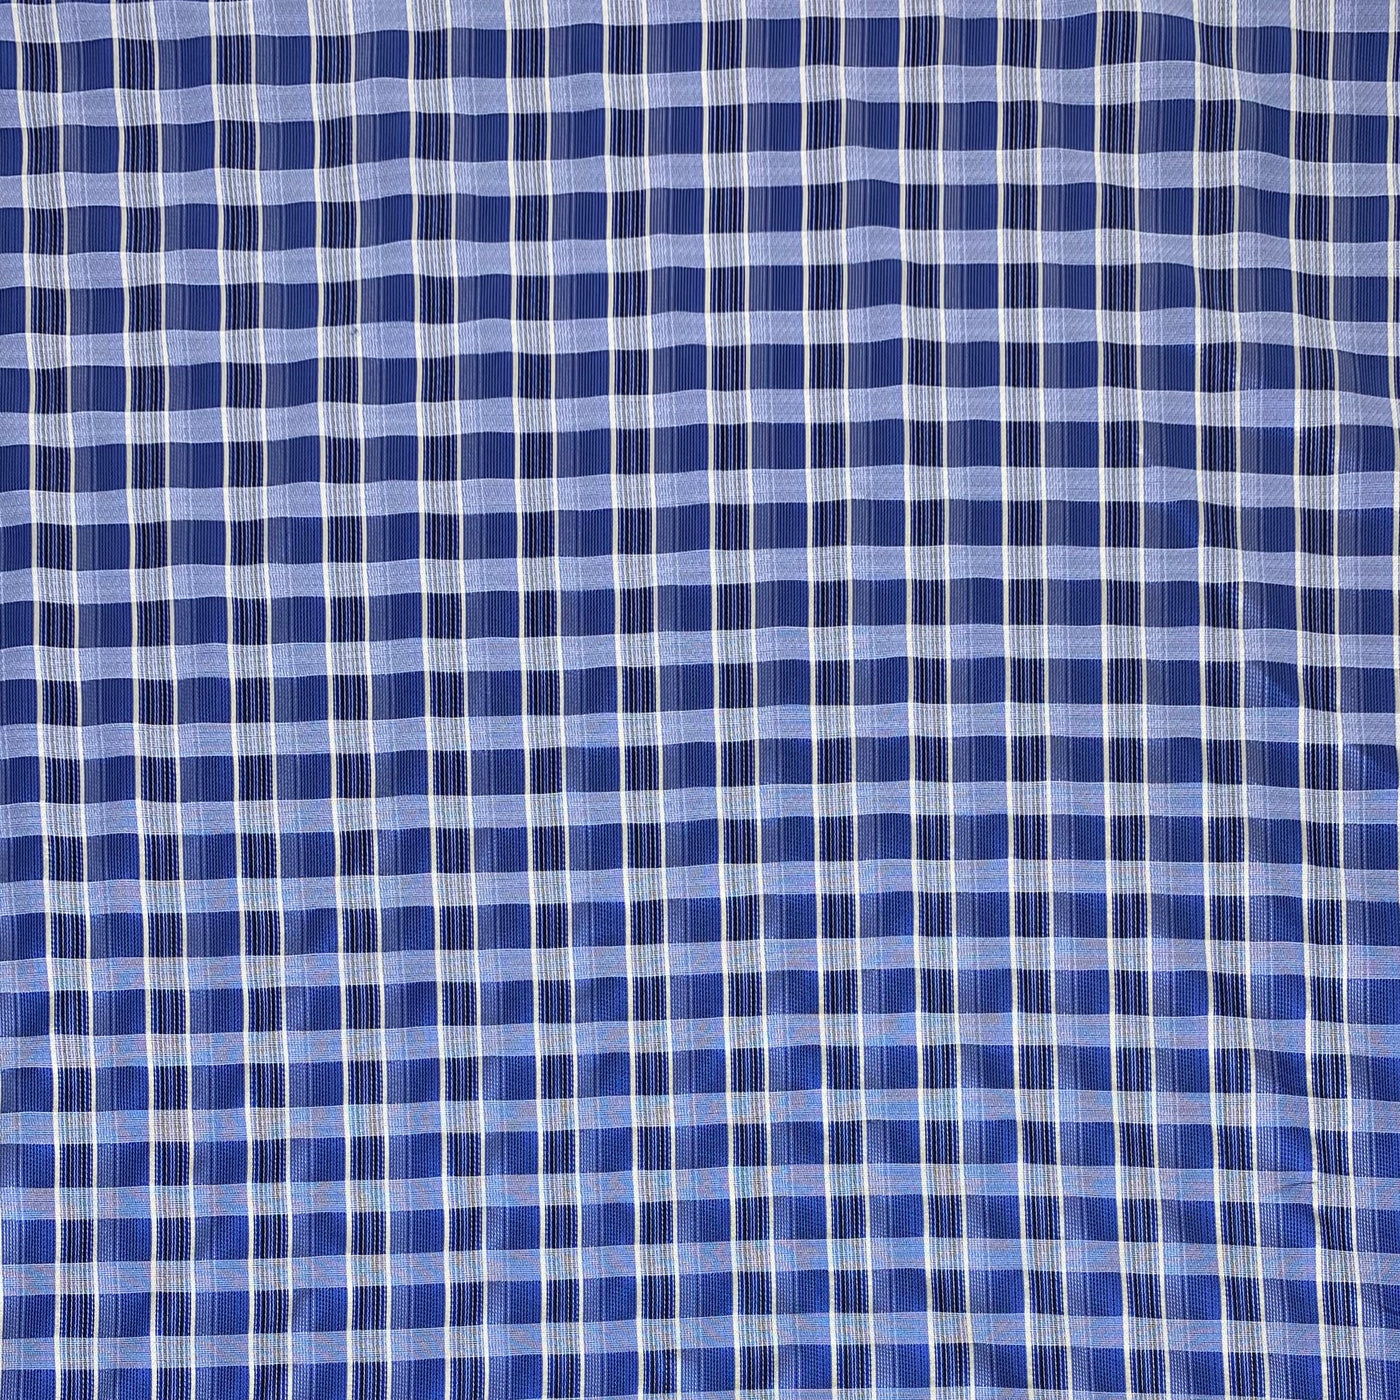 Plaid Silk/Polyester - Blue / White - Remnant